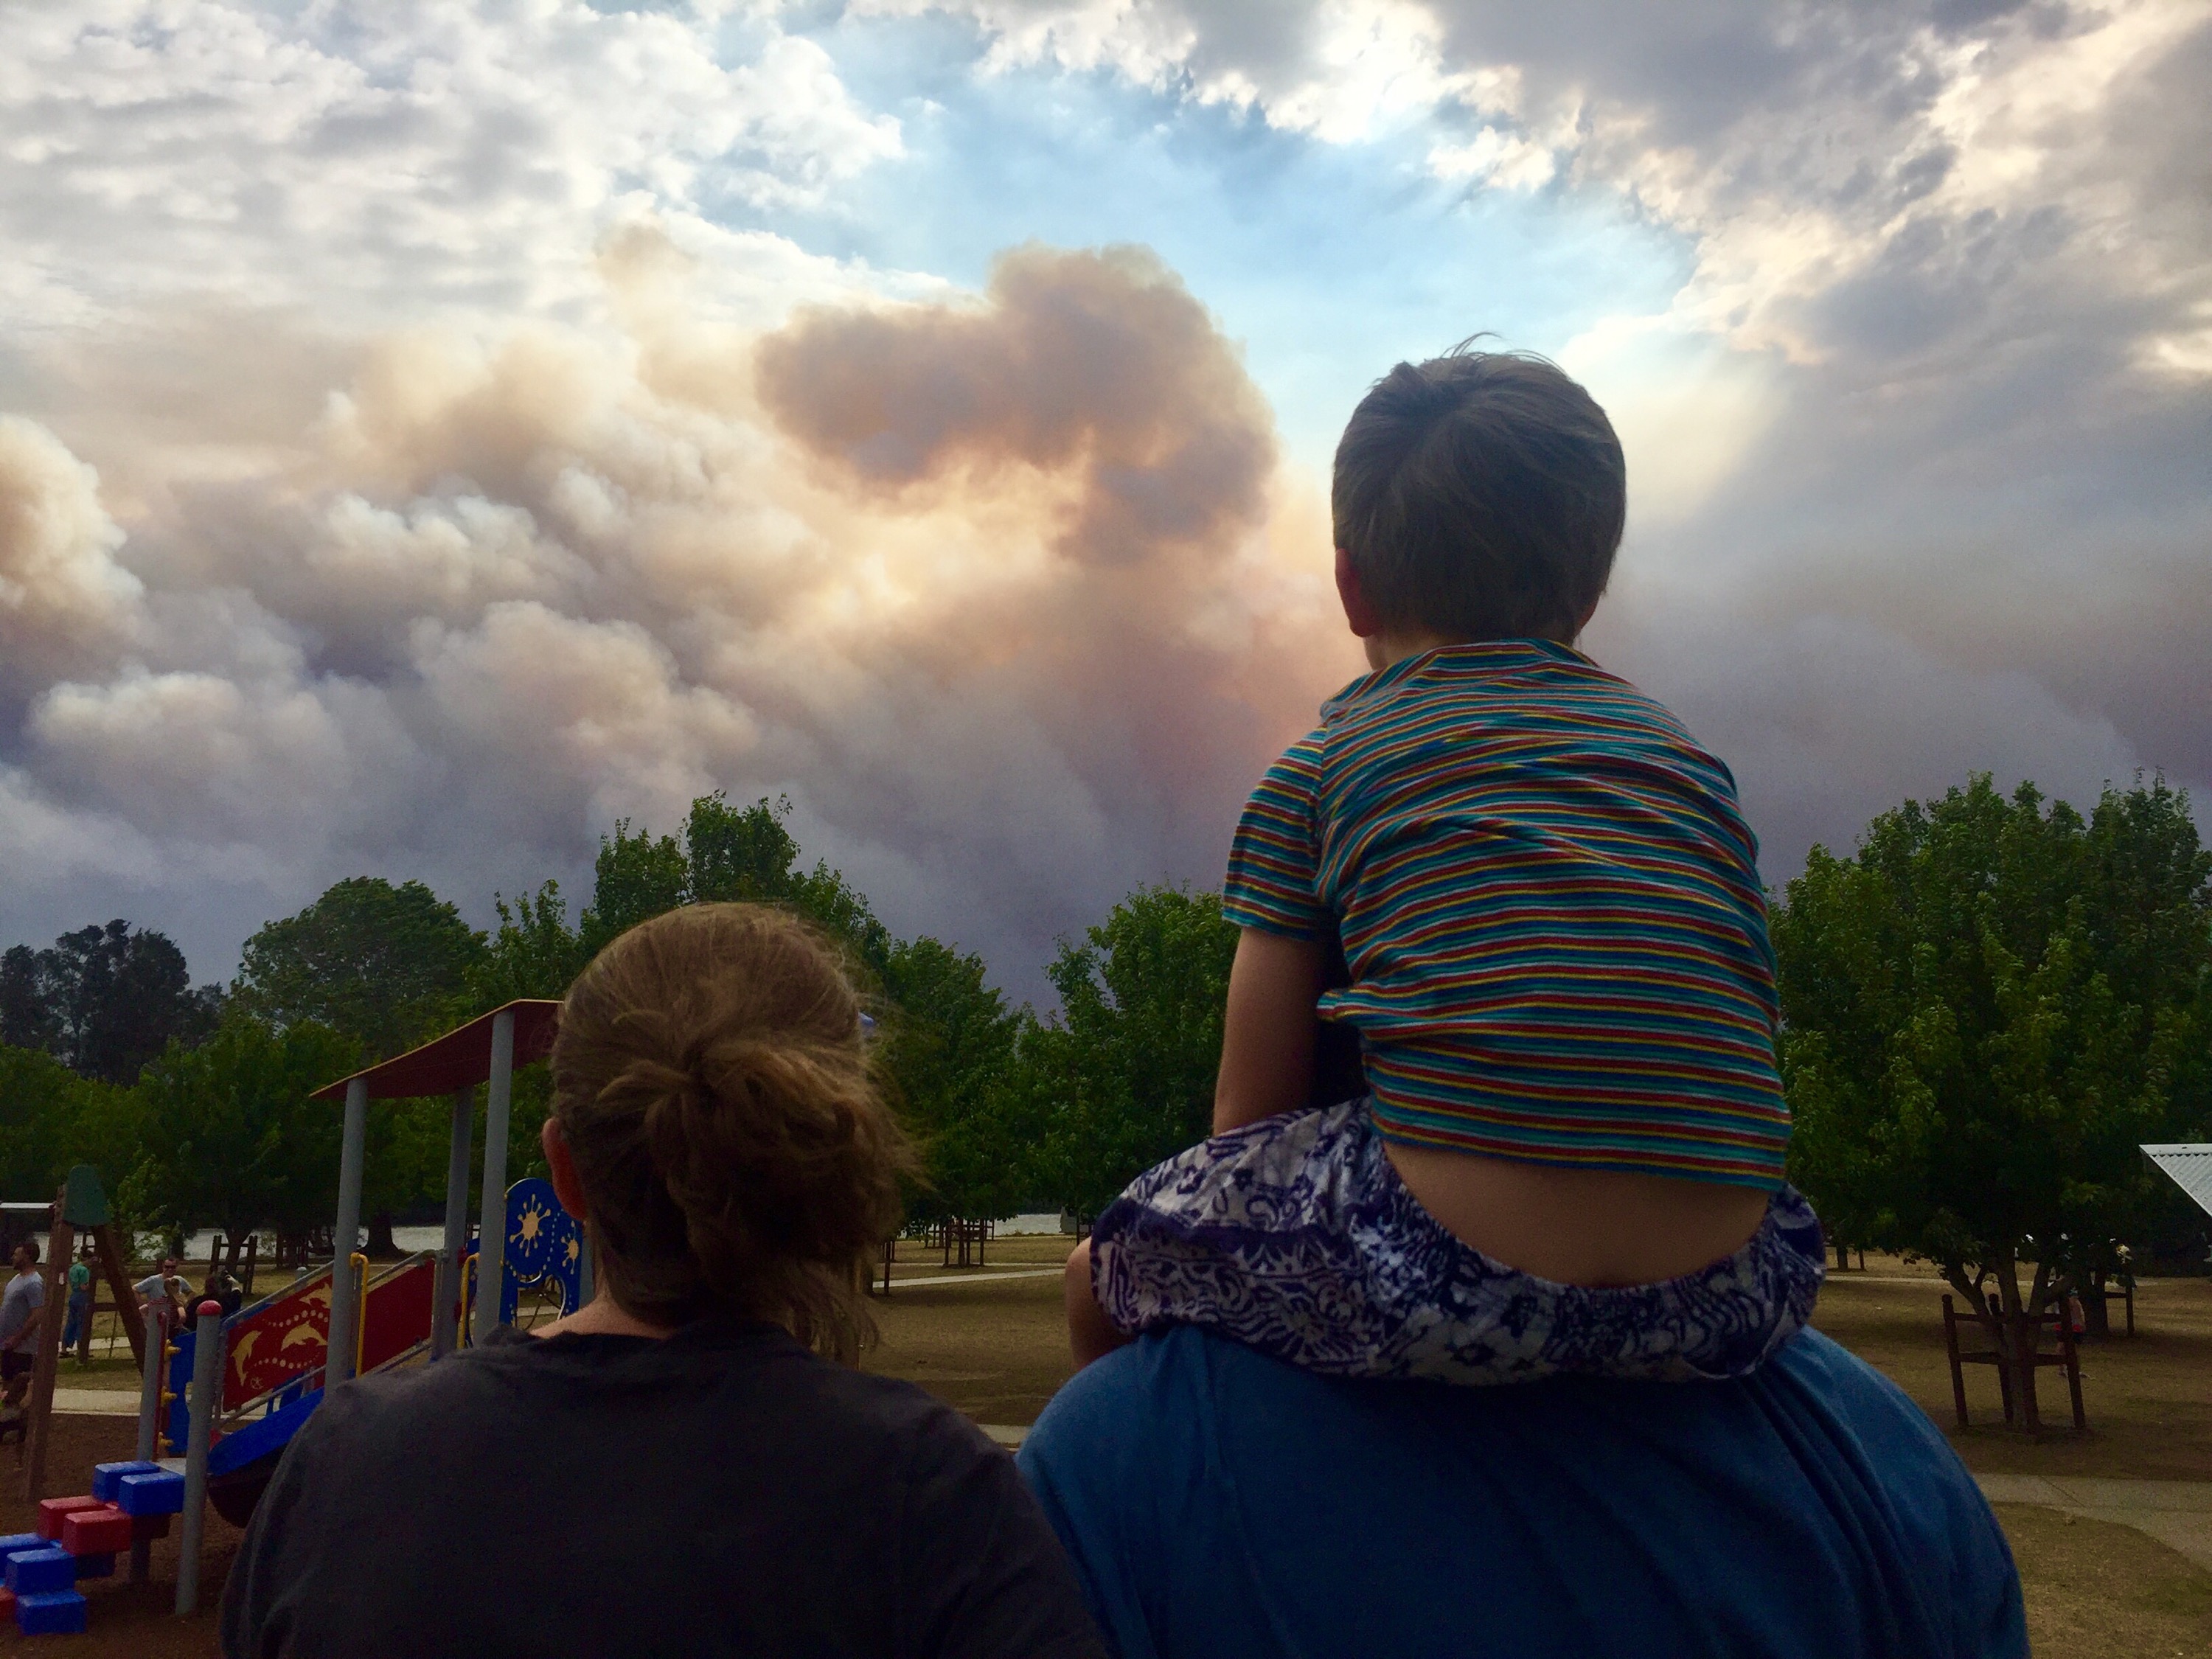 NSW bushfire season comes to an end but its devastating after-effects continue